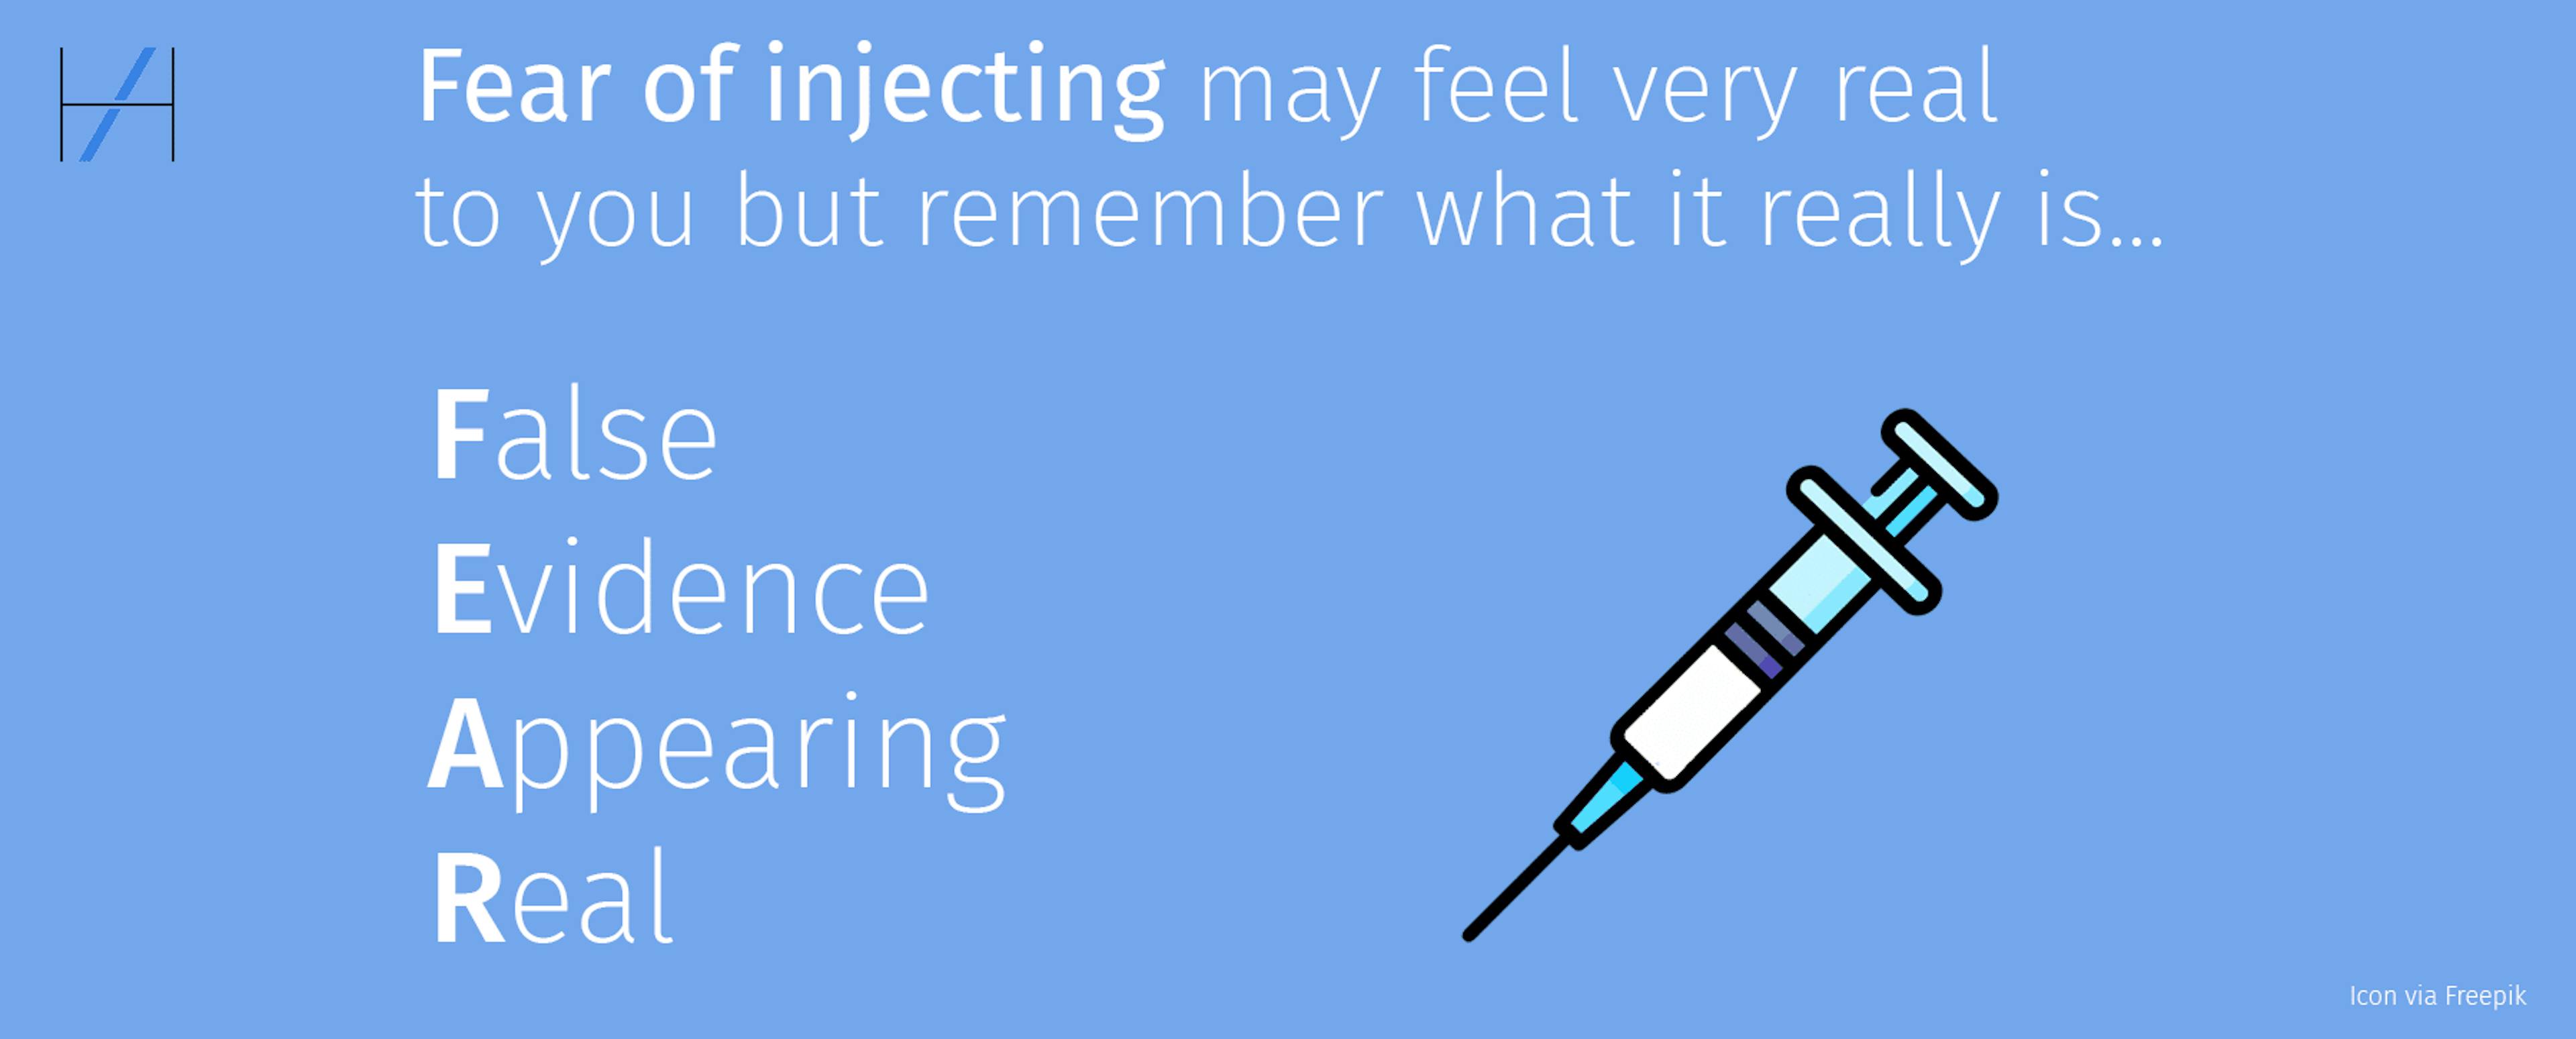 Fear of Injecting advice